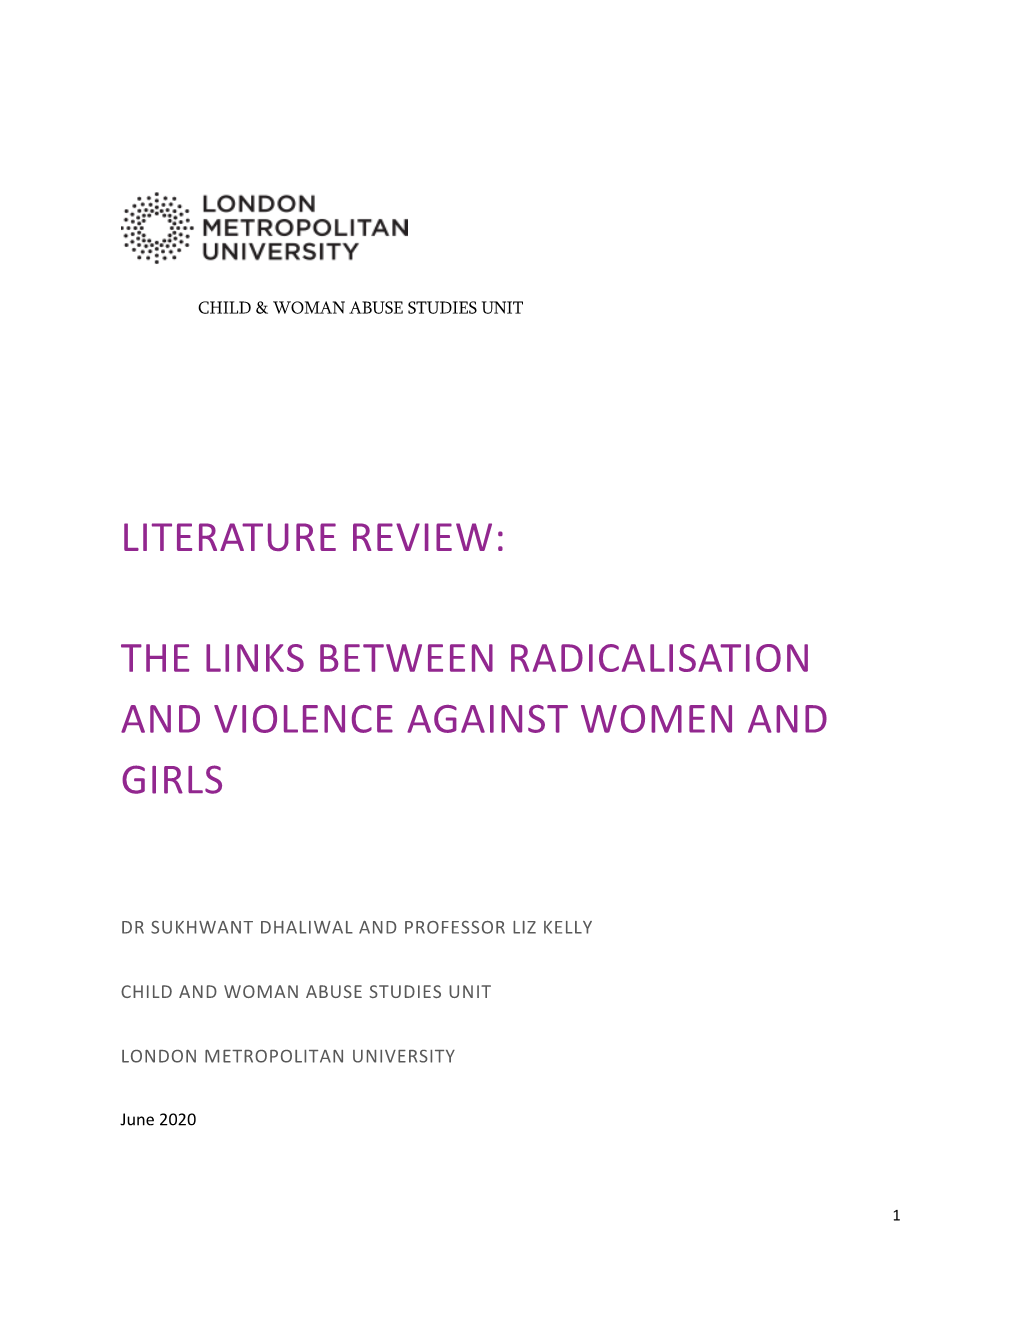 The Links Between Radicalisation and Violence Against Women and Girls